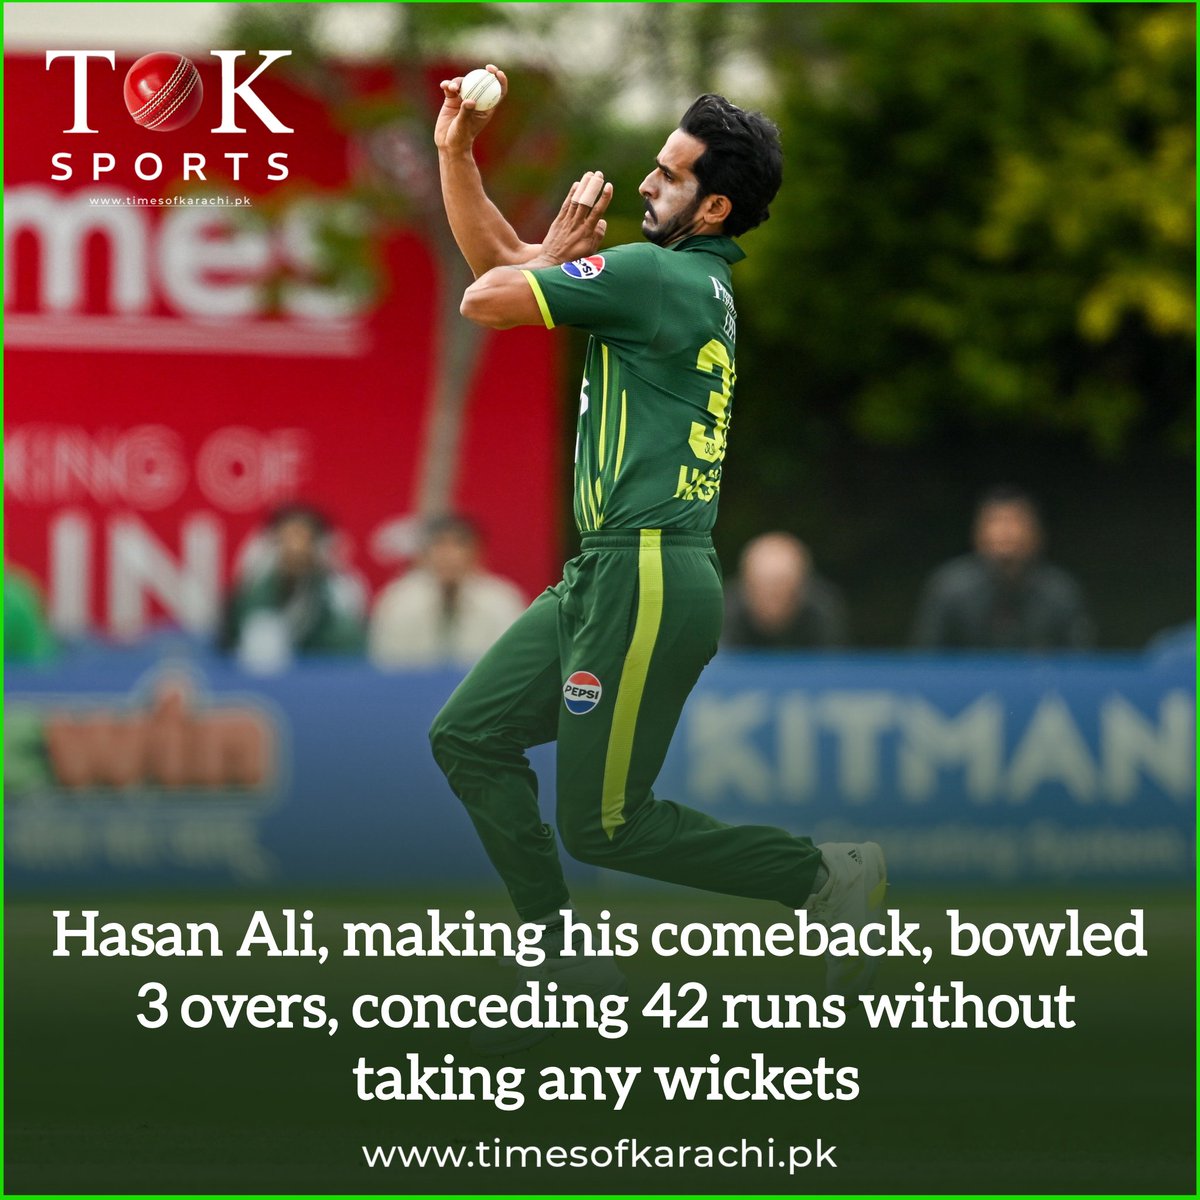 A disappointing spell by Hasan Ali in his comeback

#TOKSports #HasanAli #PakvIre